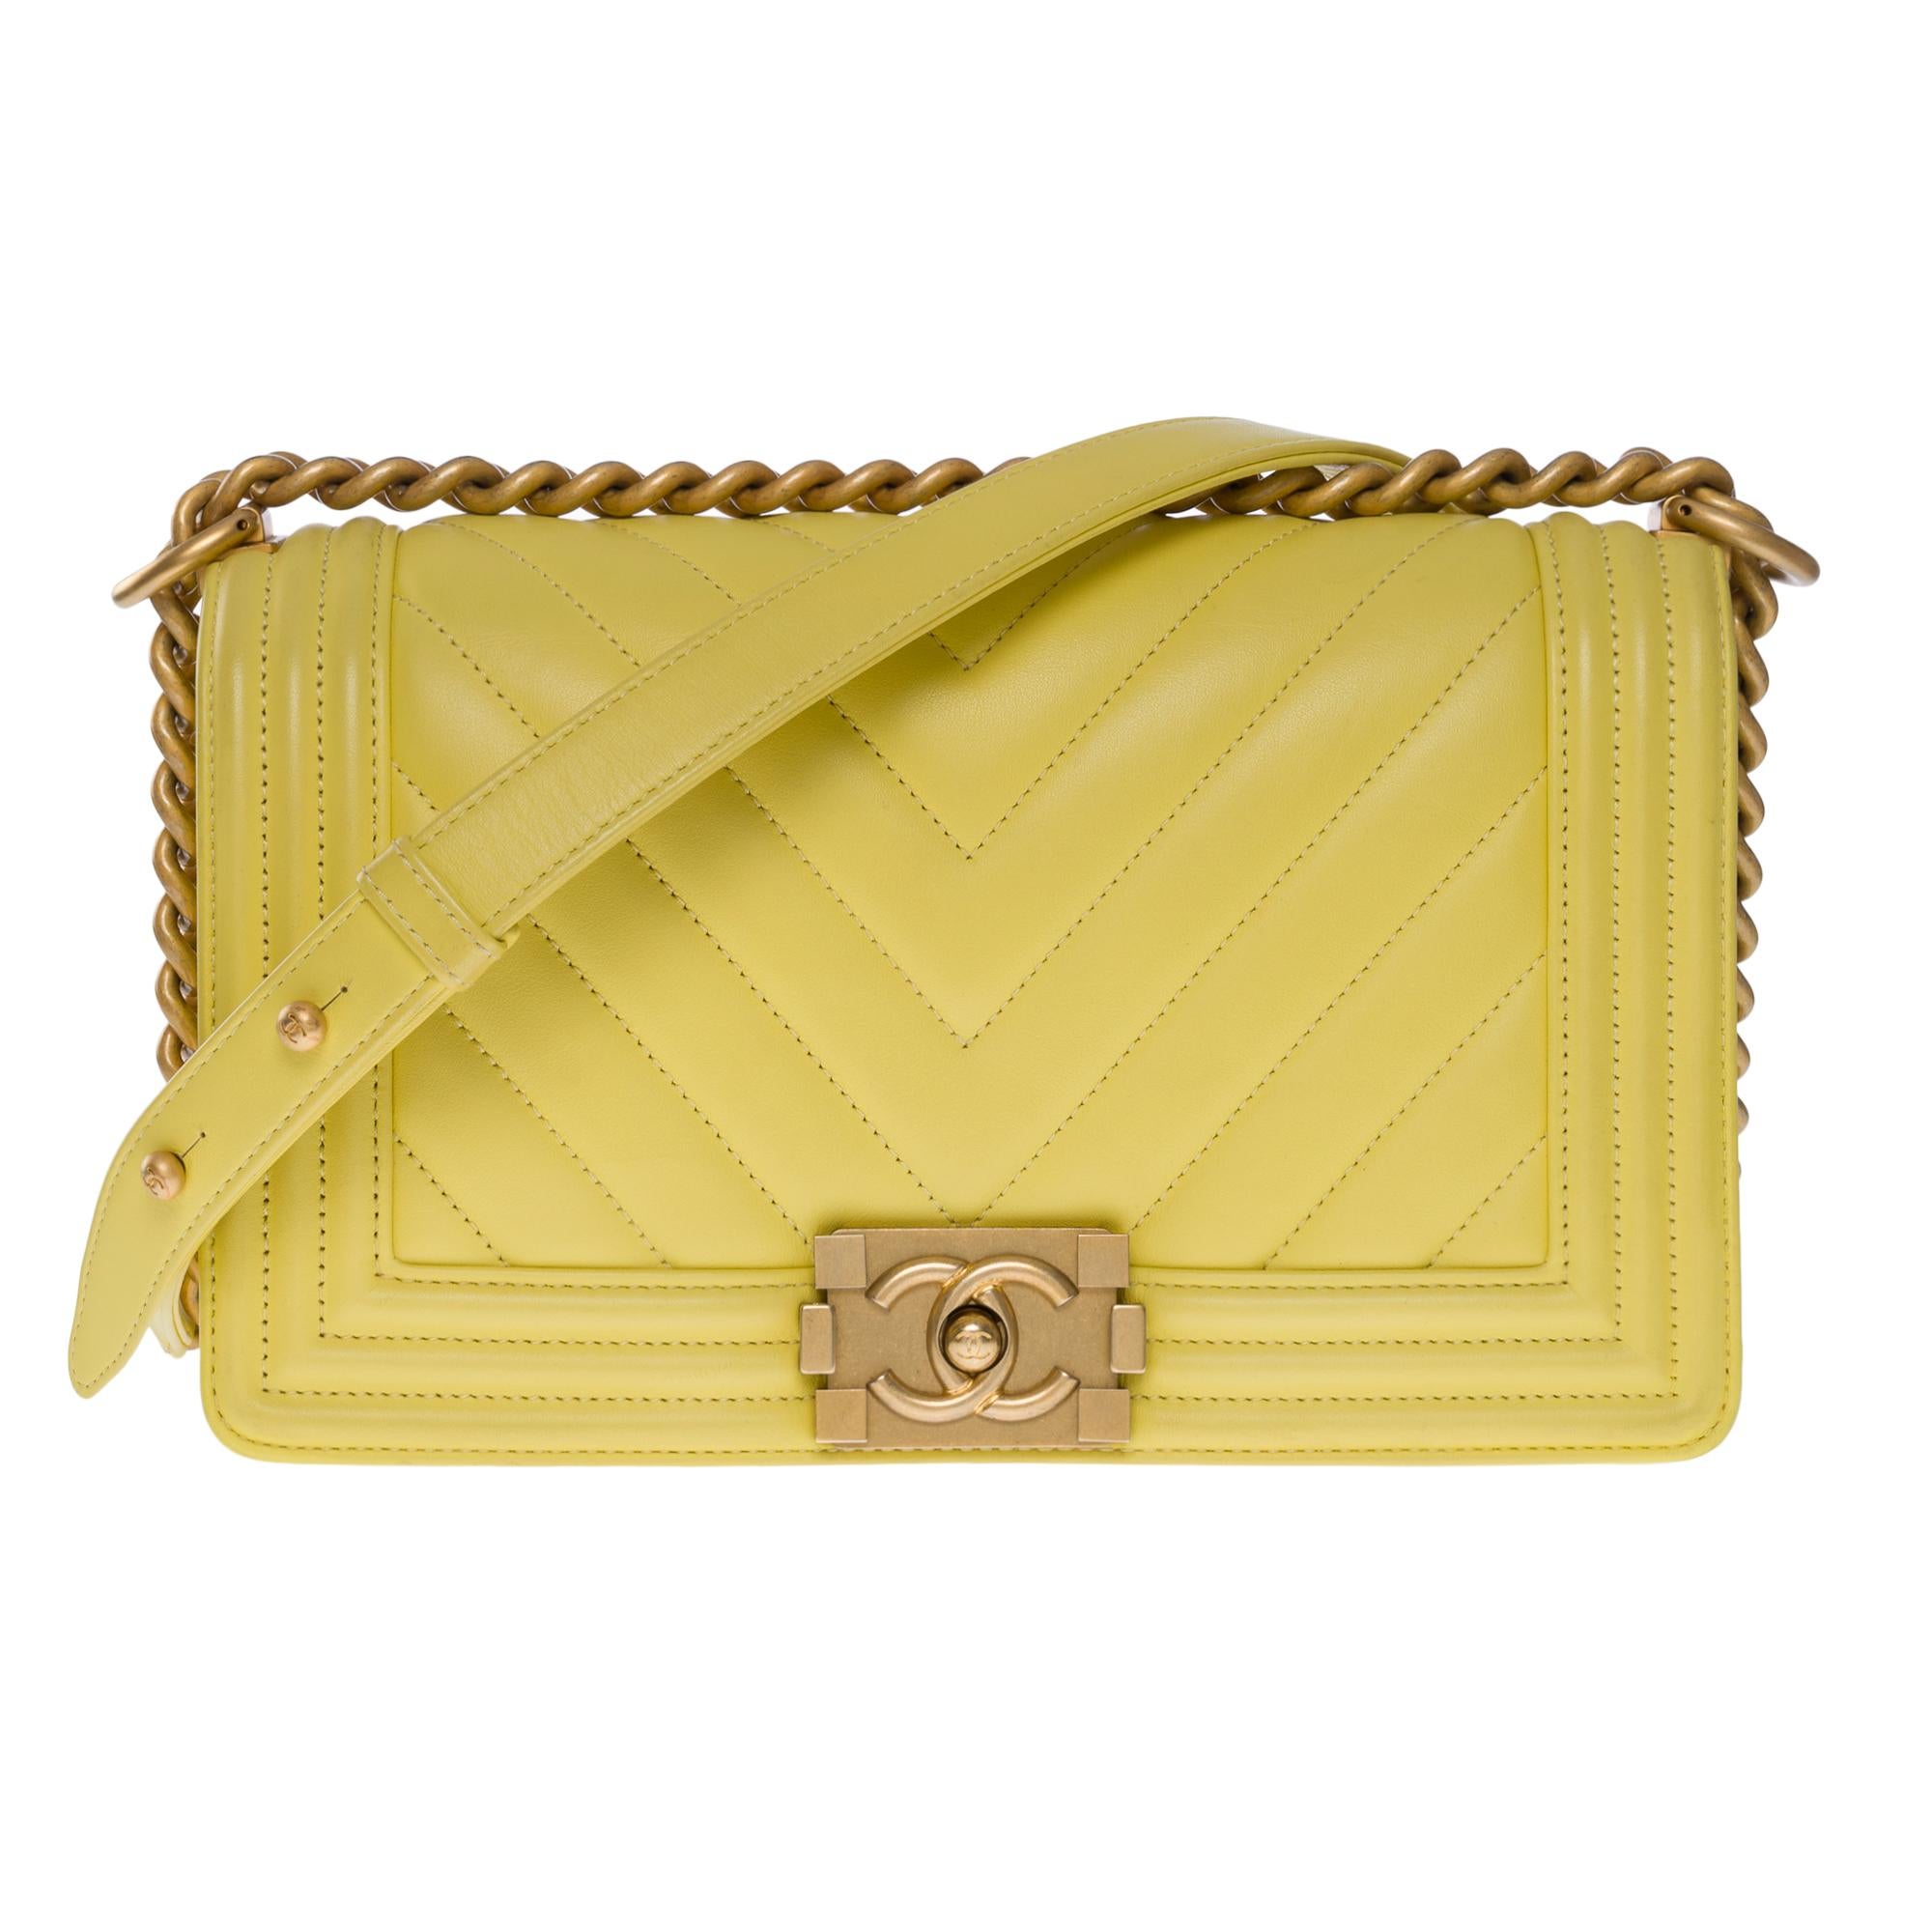 Exquisite Chanel Boy Old Medium shoulder bag in lemon yellow herringbone quilted leather, matte gold metal hardware, matte gold metal chain handle and yellow leather for a shoulder and crossbody carry
Full flap closure, push button clasp with CC